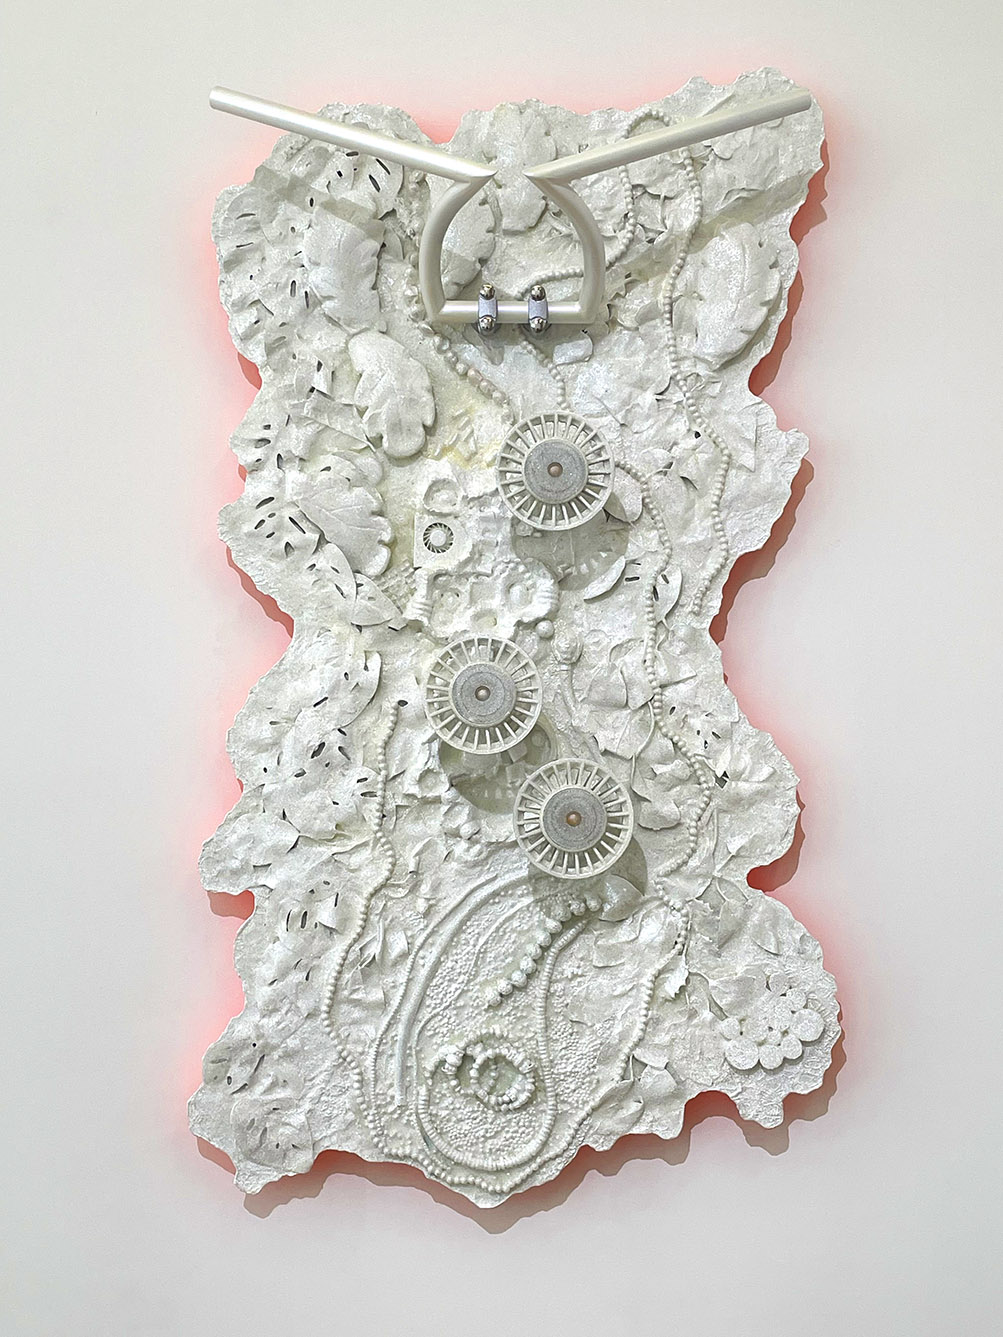 A white sculpture with gears and flowers

Description automatically generated